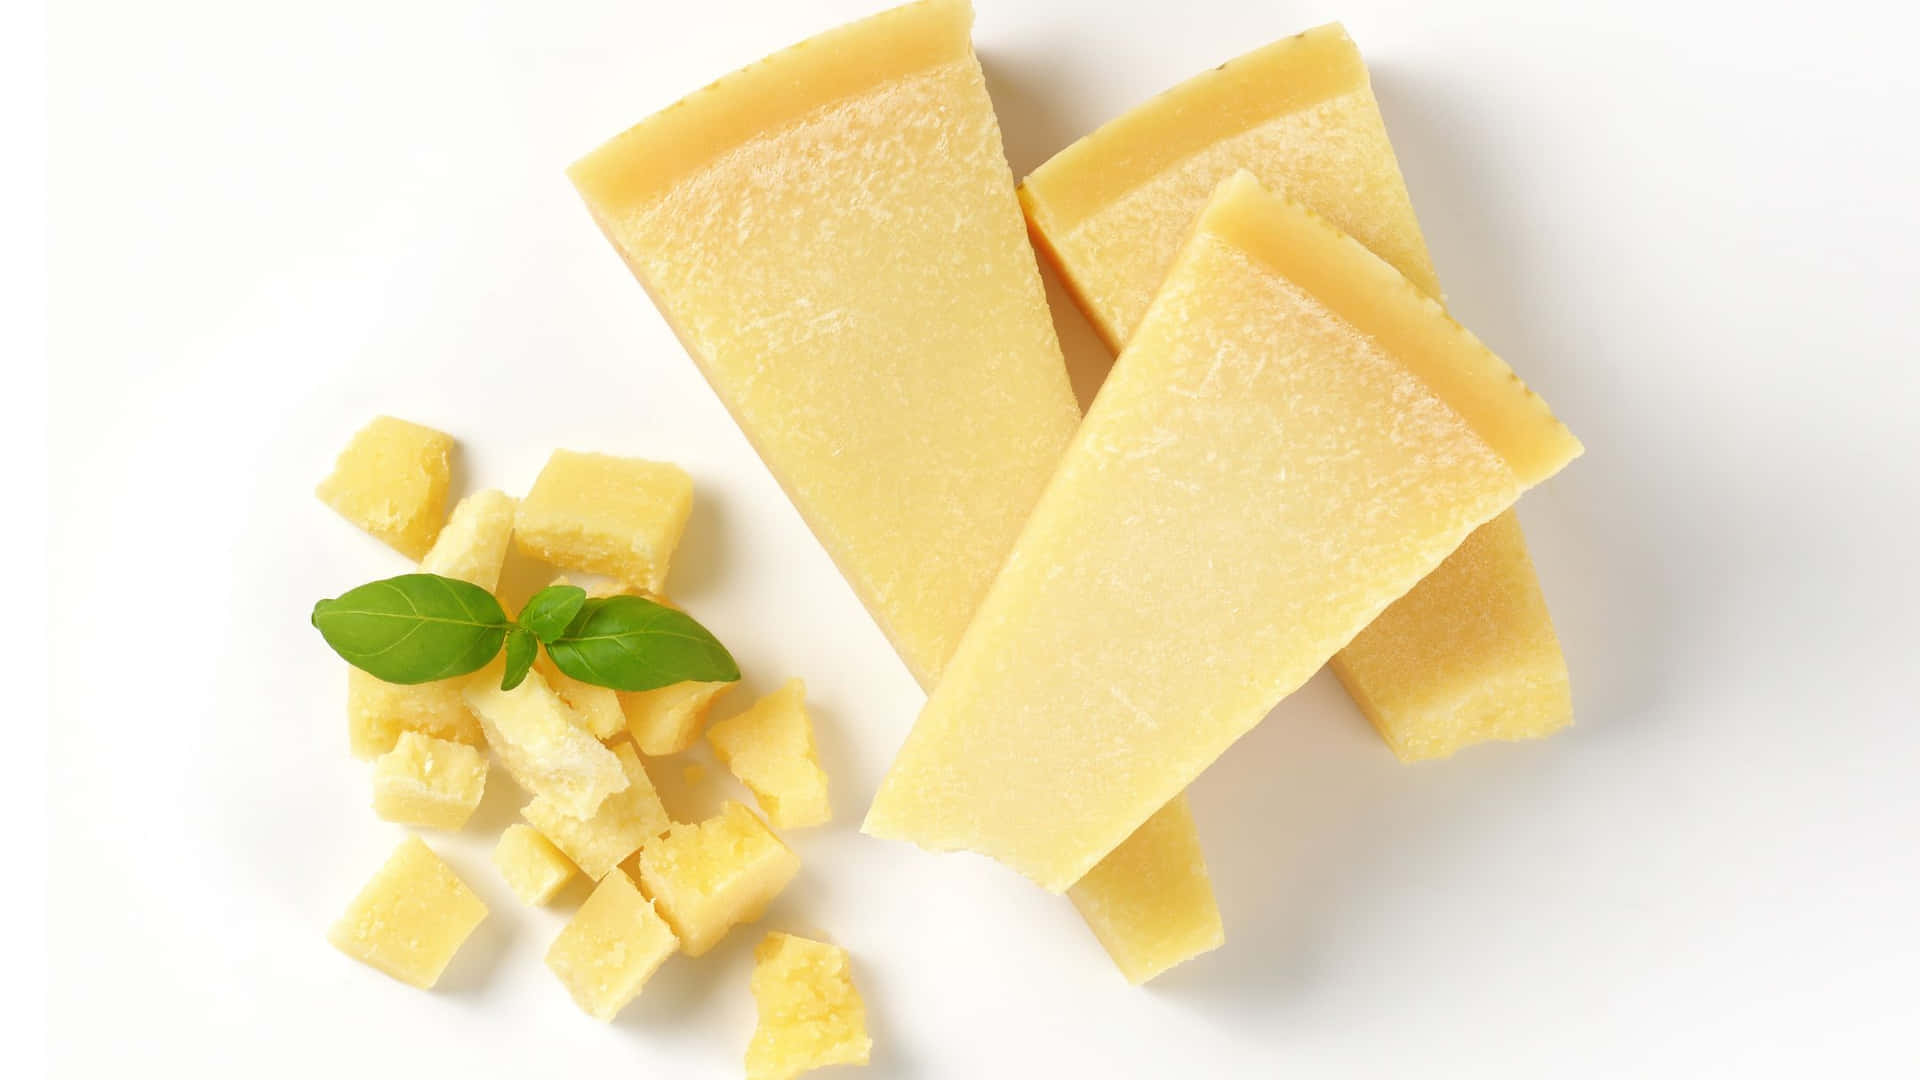 Rich and creamy cheese is an ideal snack or accompaniment to a meal.